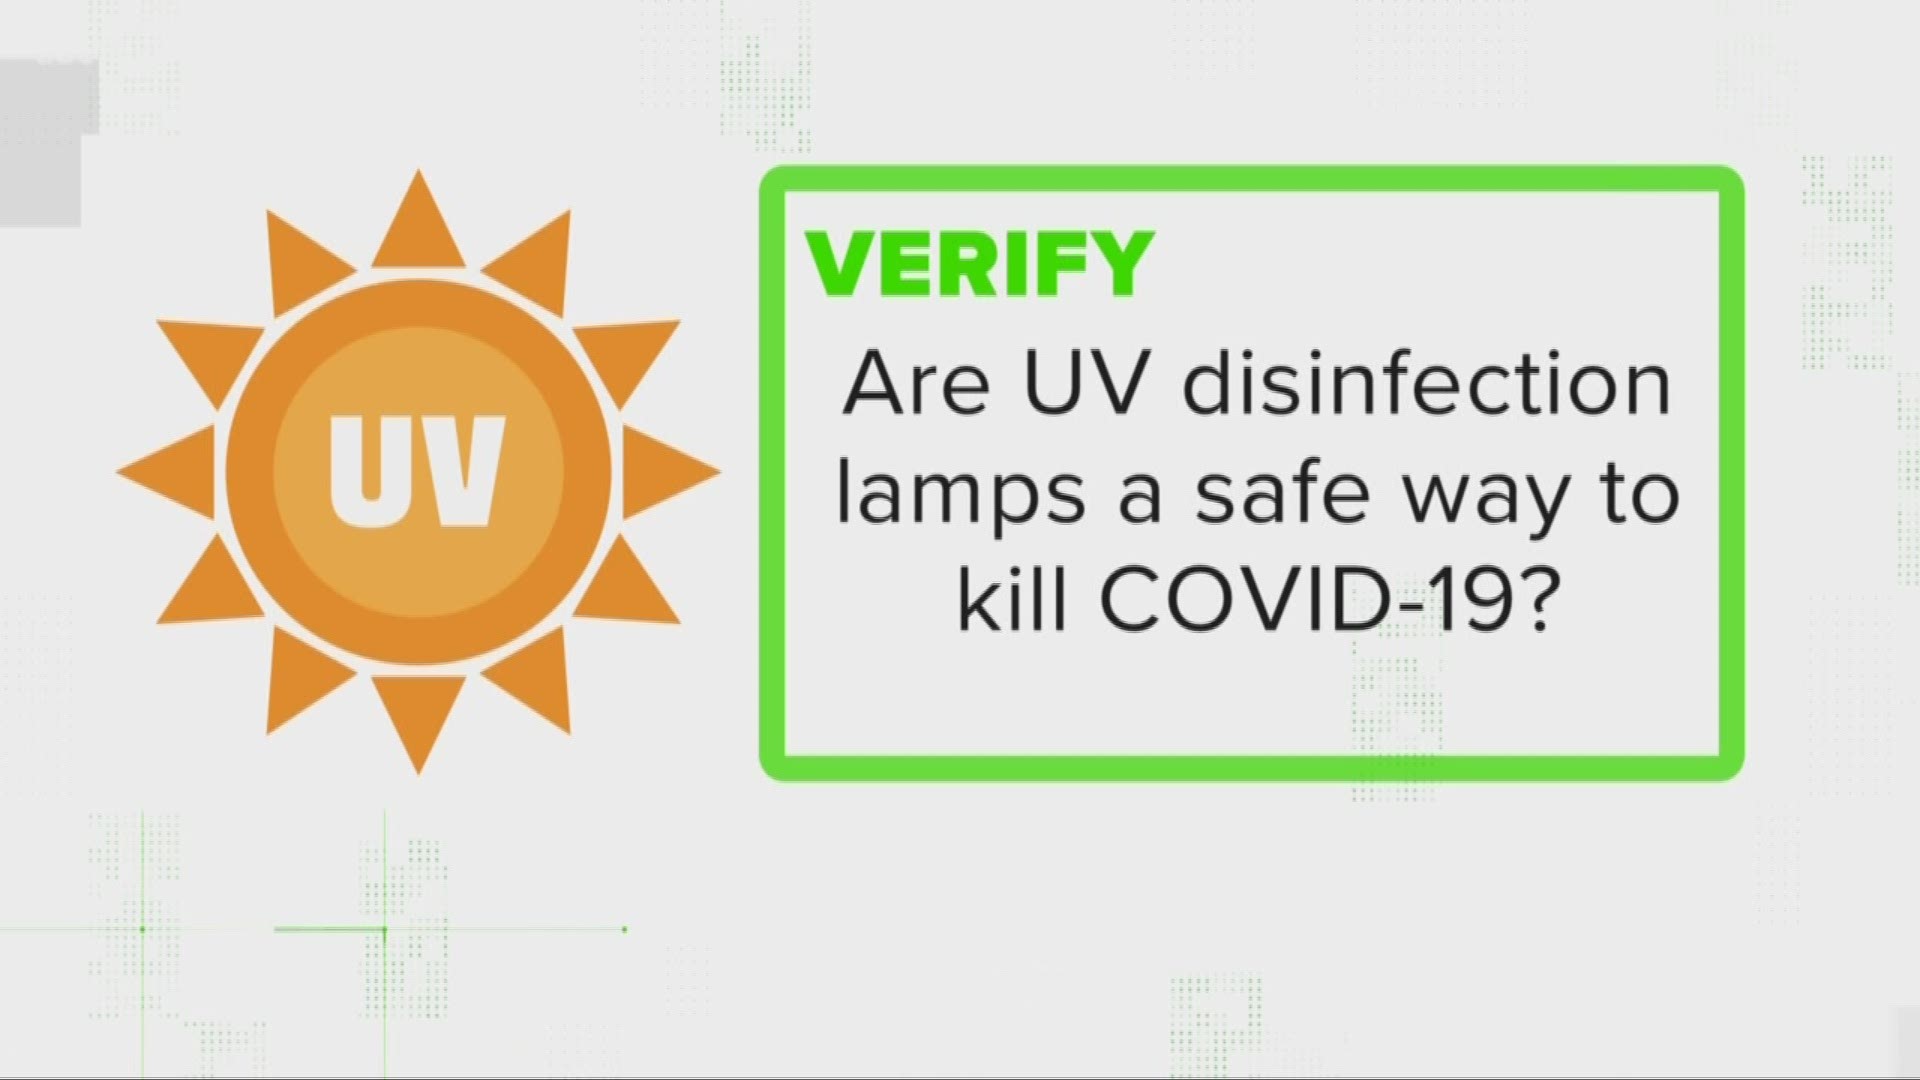 You may have seen claims online that UV light and sunlight can kill off coronavirus. ABC10's Carley Gomez looked to VERIFY if those claims are accurate.